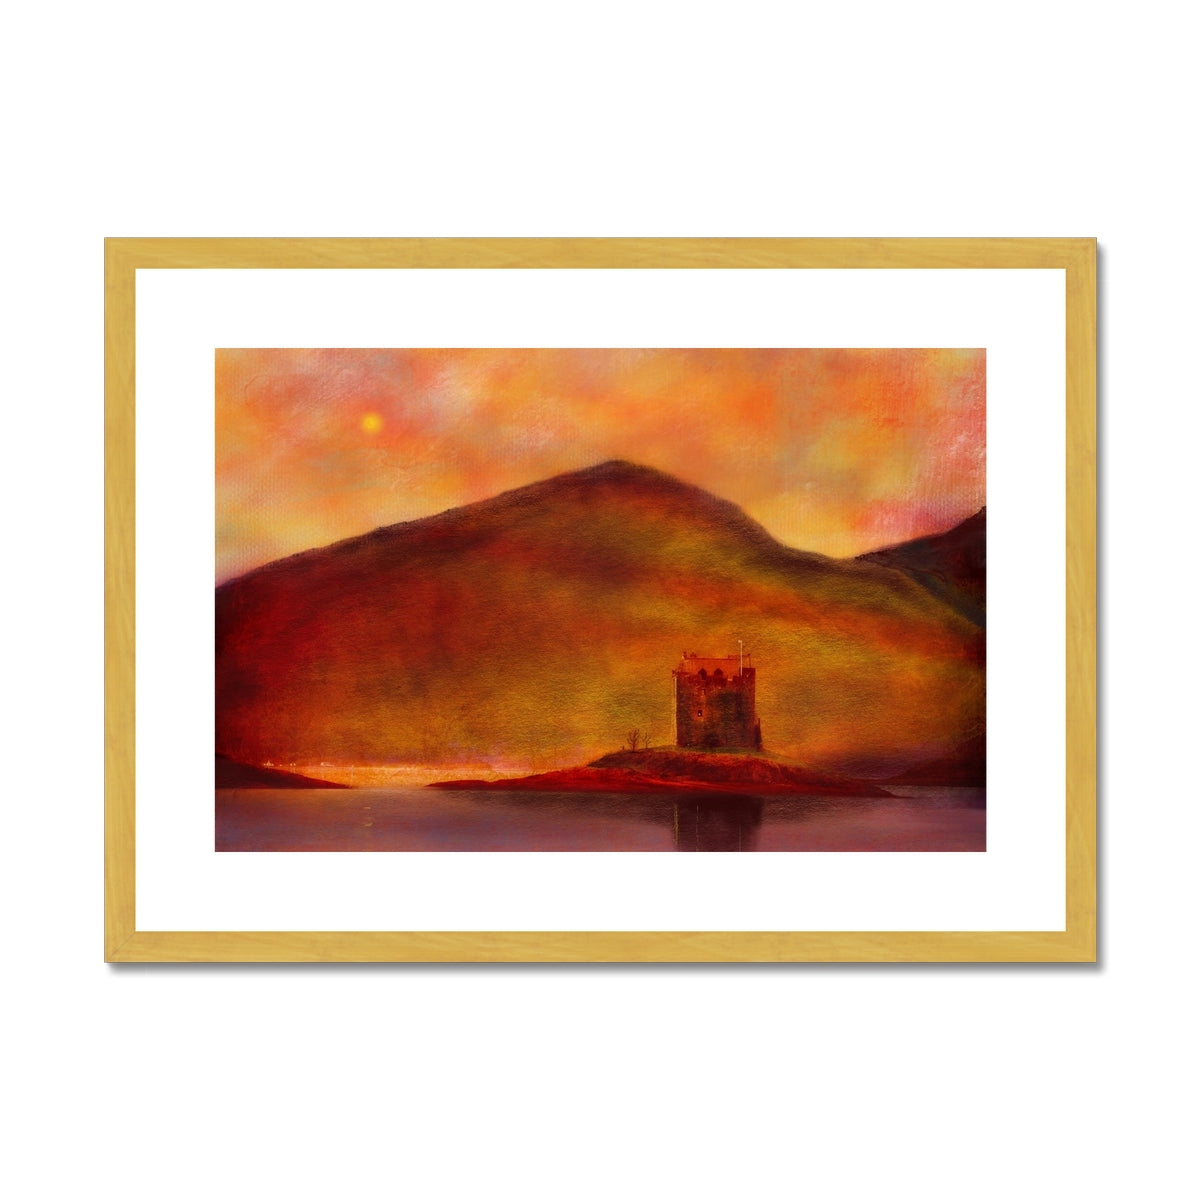 Castle Stalker Sunset Painting | Antique Framed & Mounted Prints From Scotland-Antique Framed & Mounted Prints-Historic & Iconic Scotland Art Gallery-A2 Landscape-Gold Frame-Paintings, Prints, Homeware, Art Gifts From Scotland By Scottish Artist Kevin Hunter